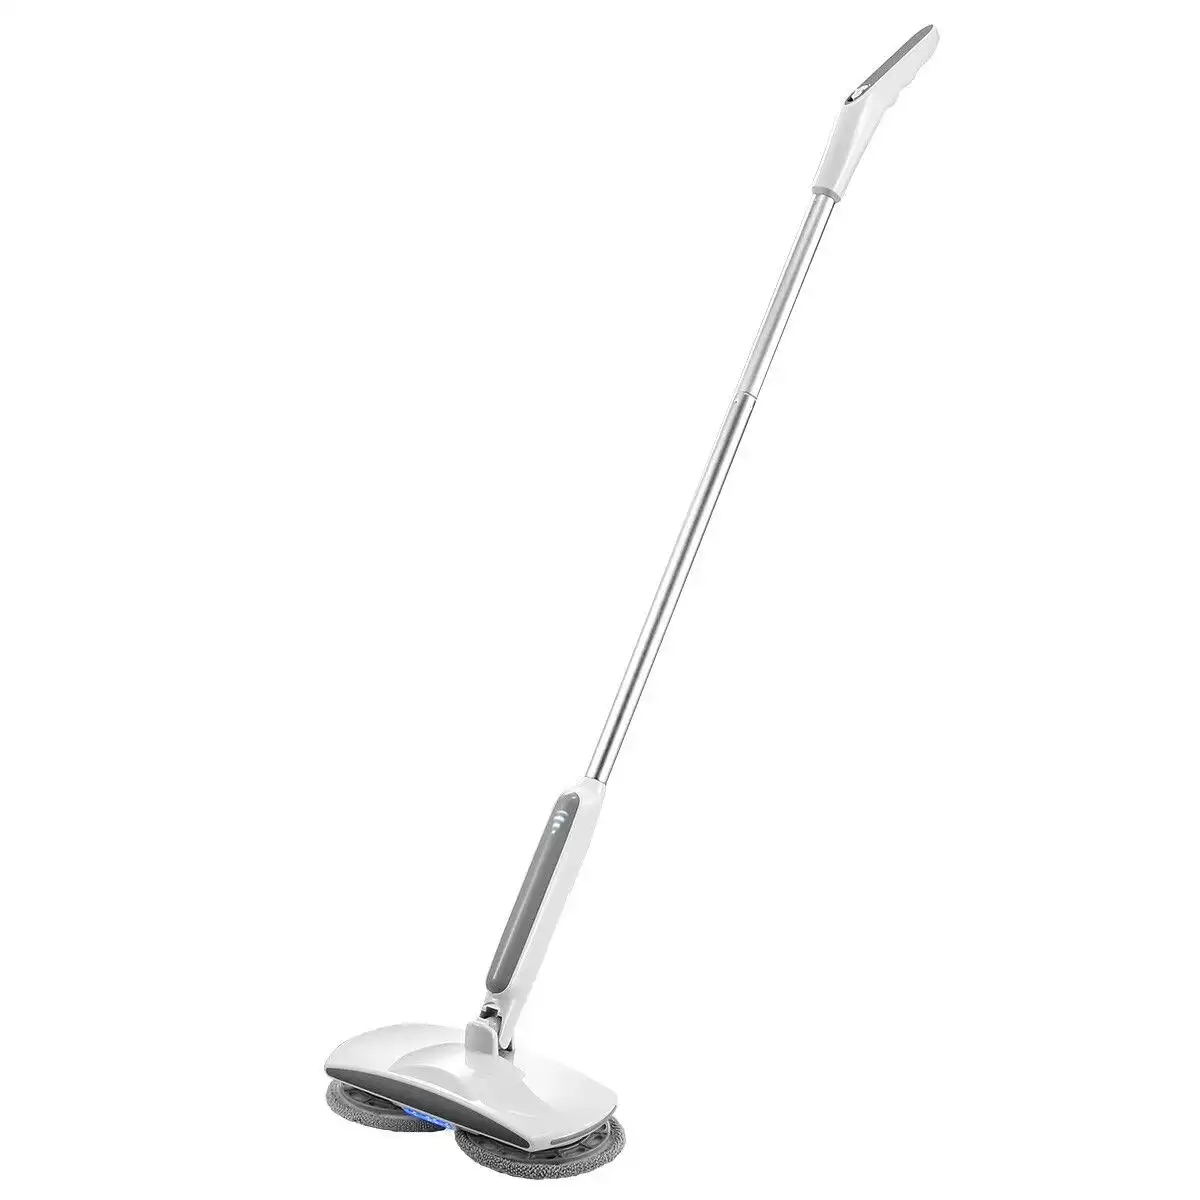 Shogun 4-In-1 Cordless Electric Mop Cleaner Floor Polisher Sweeper Washer Scrubber